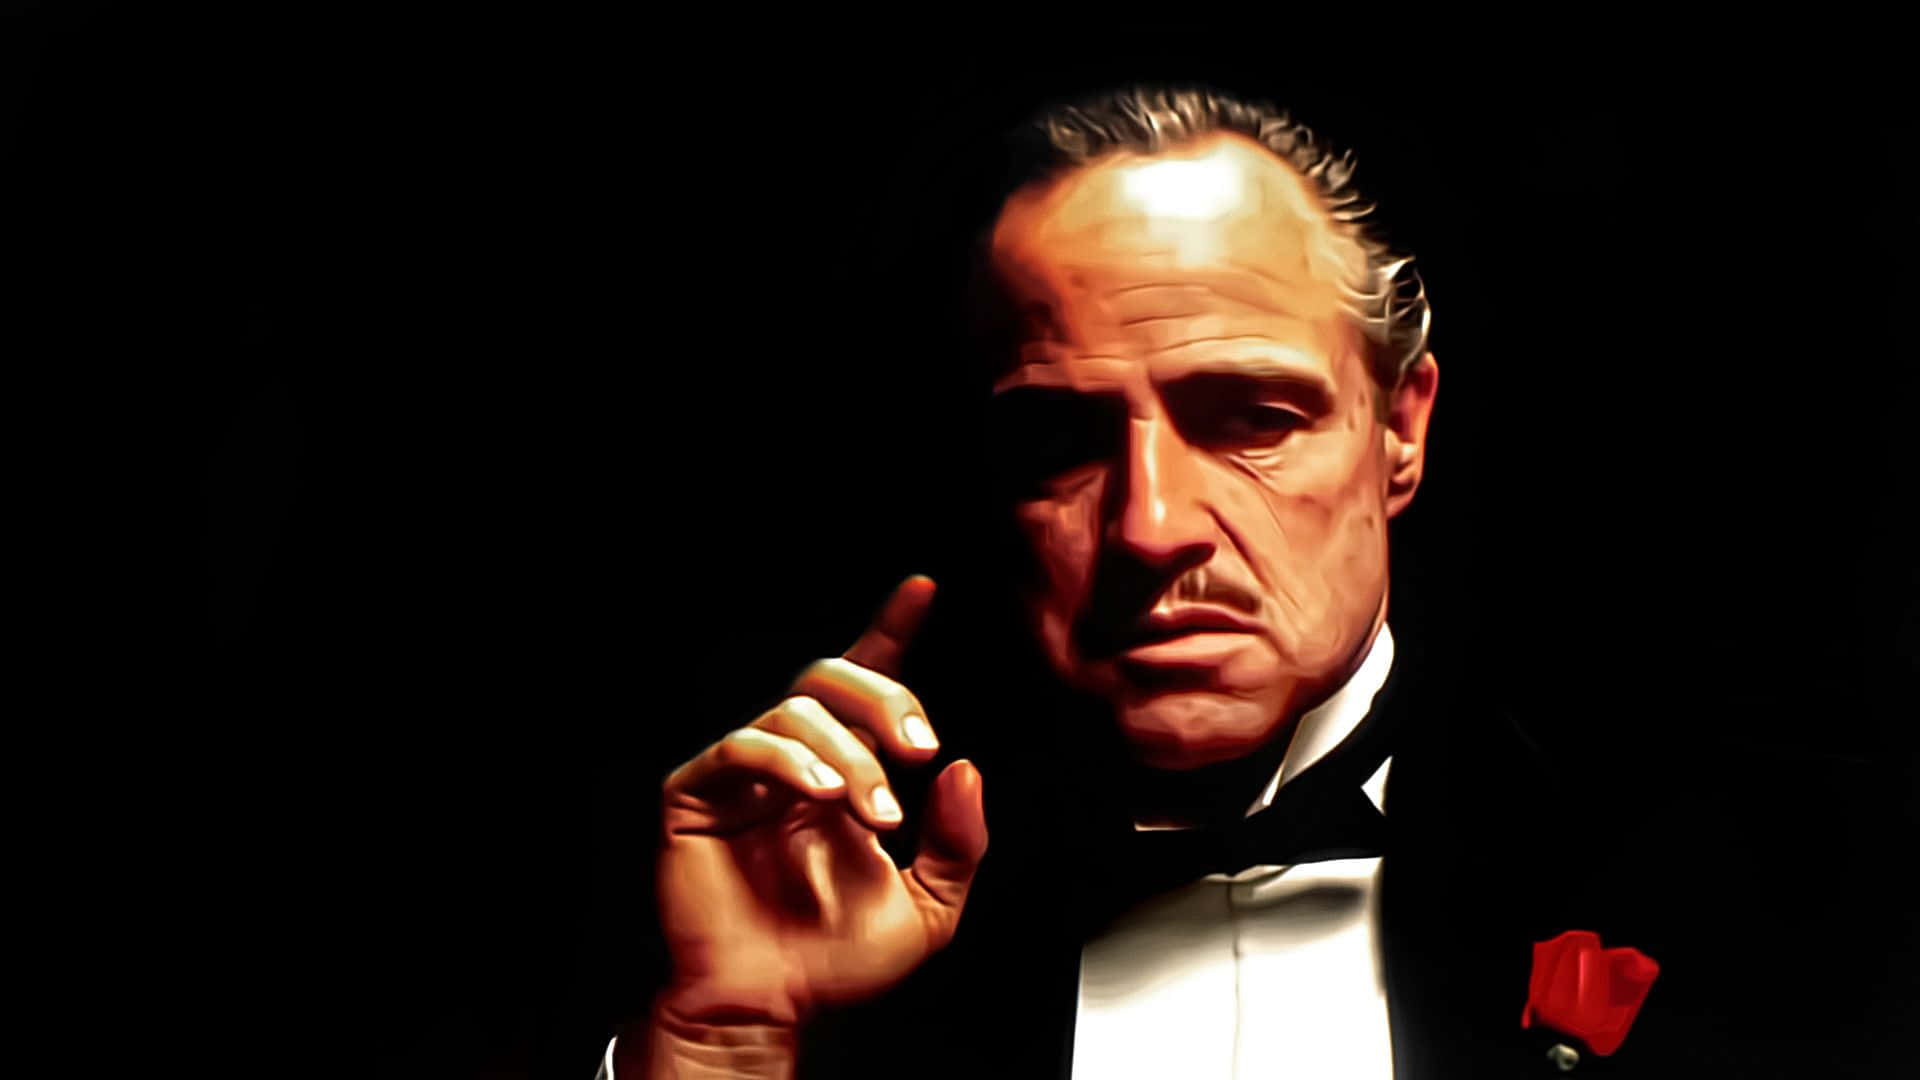 "I'll make them an offer they can't refuse.” -Michael Corleone Wallpaper